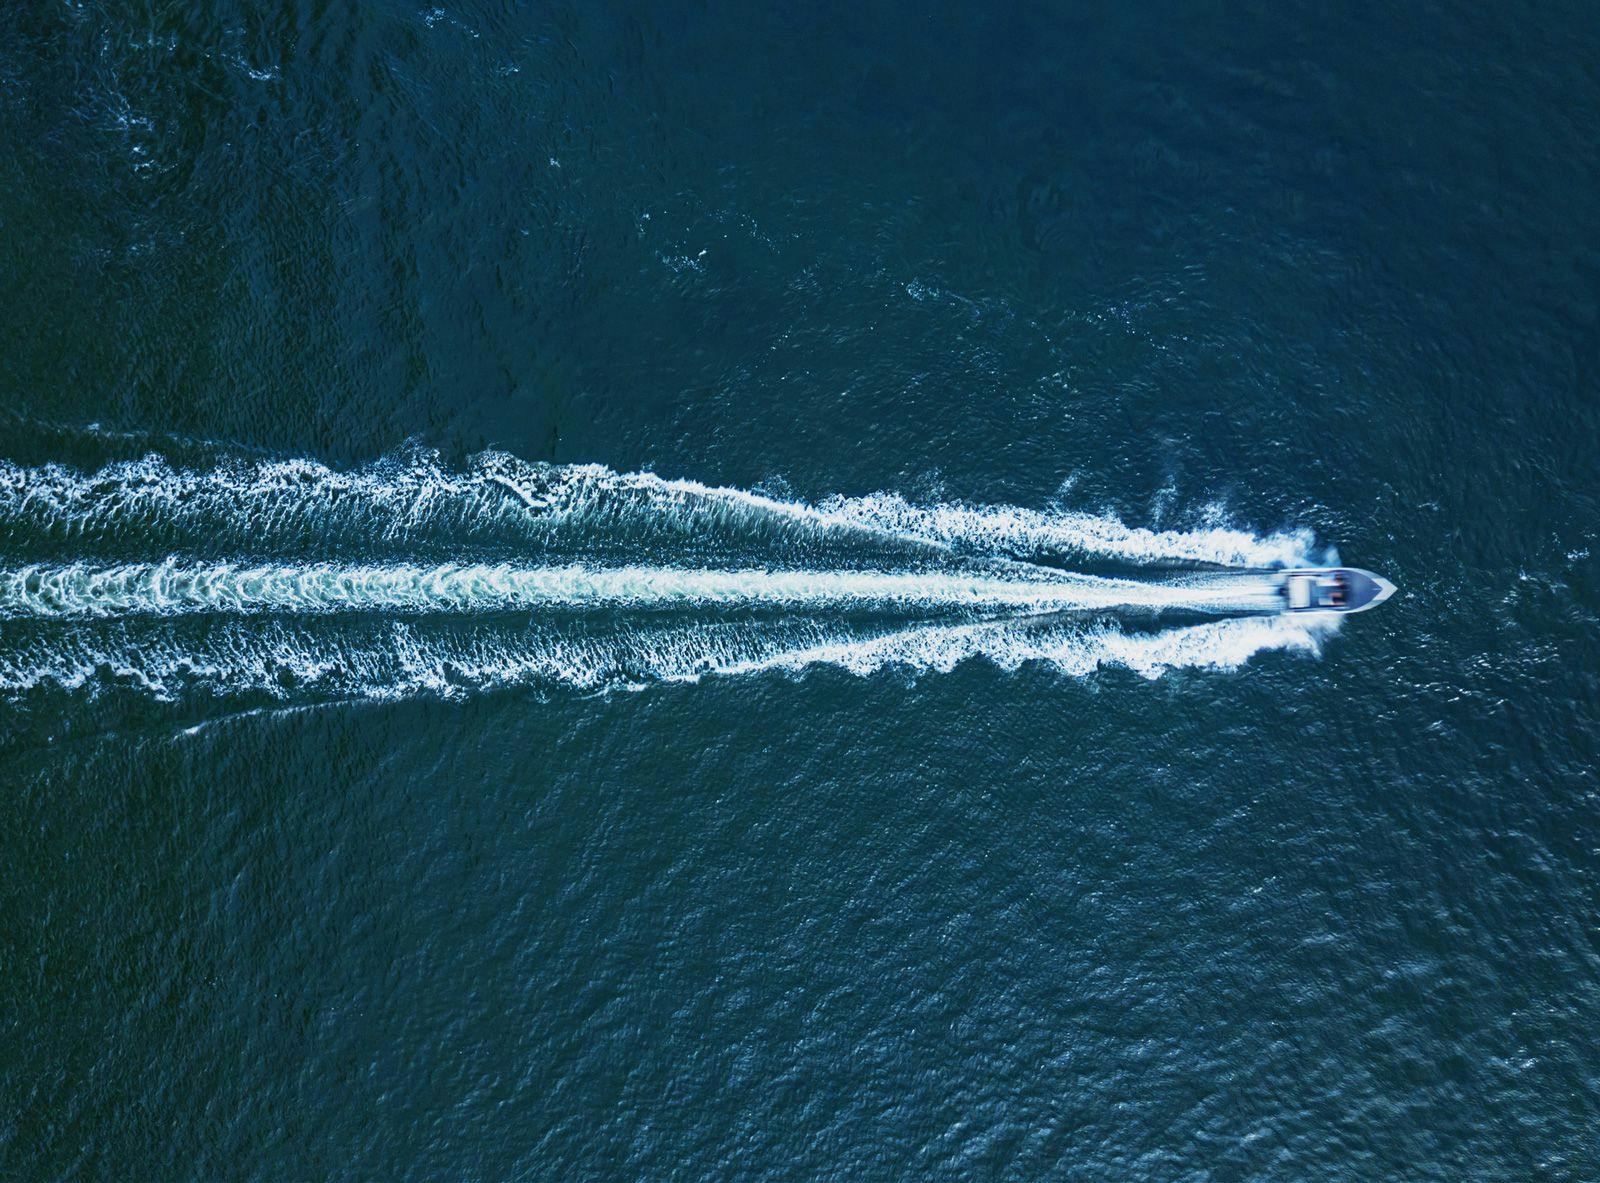 Ariel shot of a speedboat moving through the sea